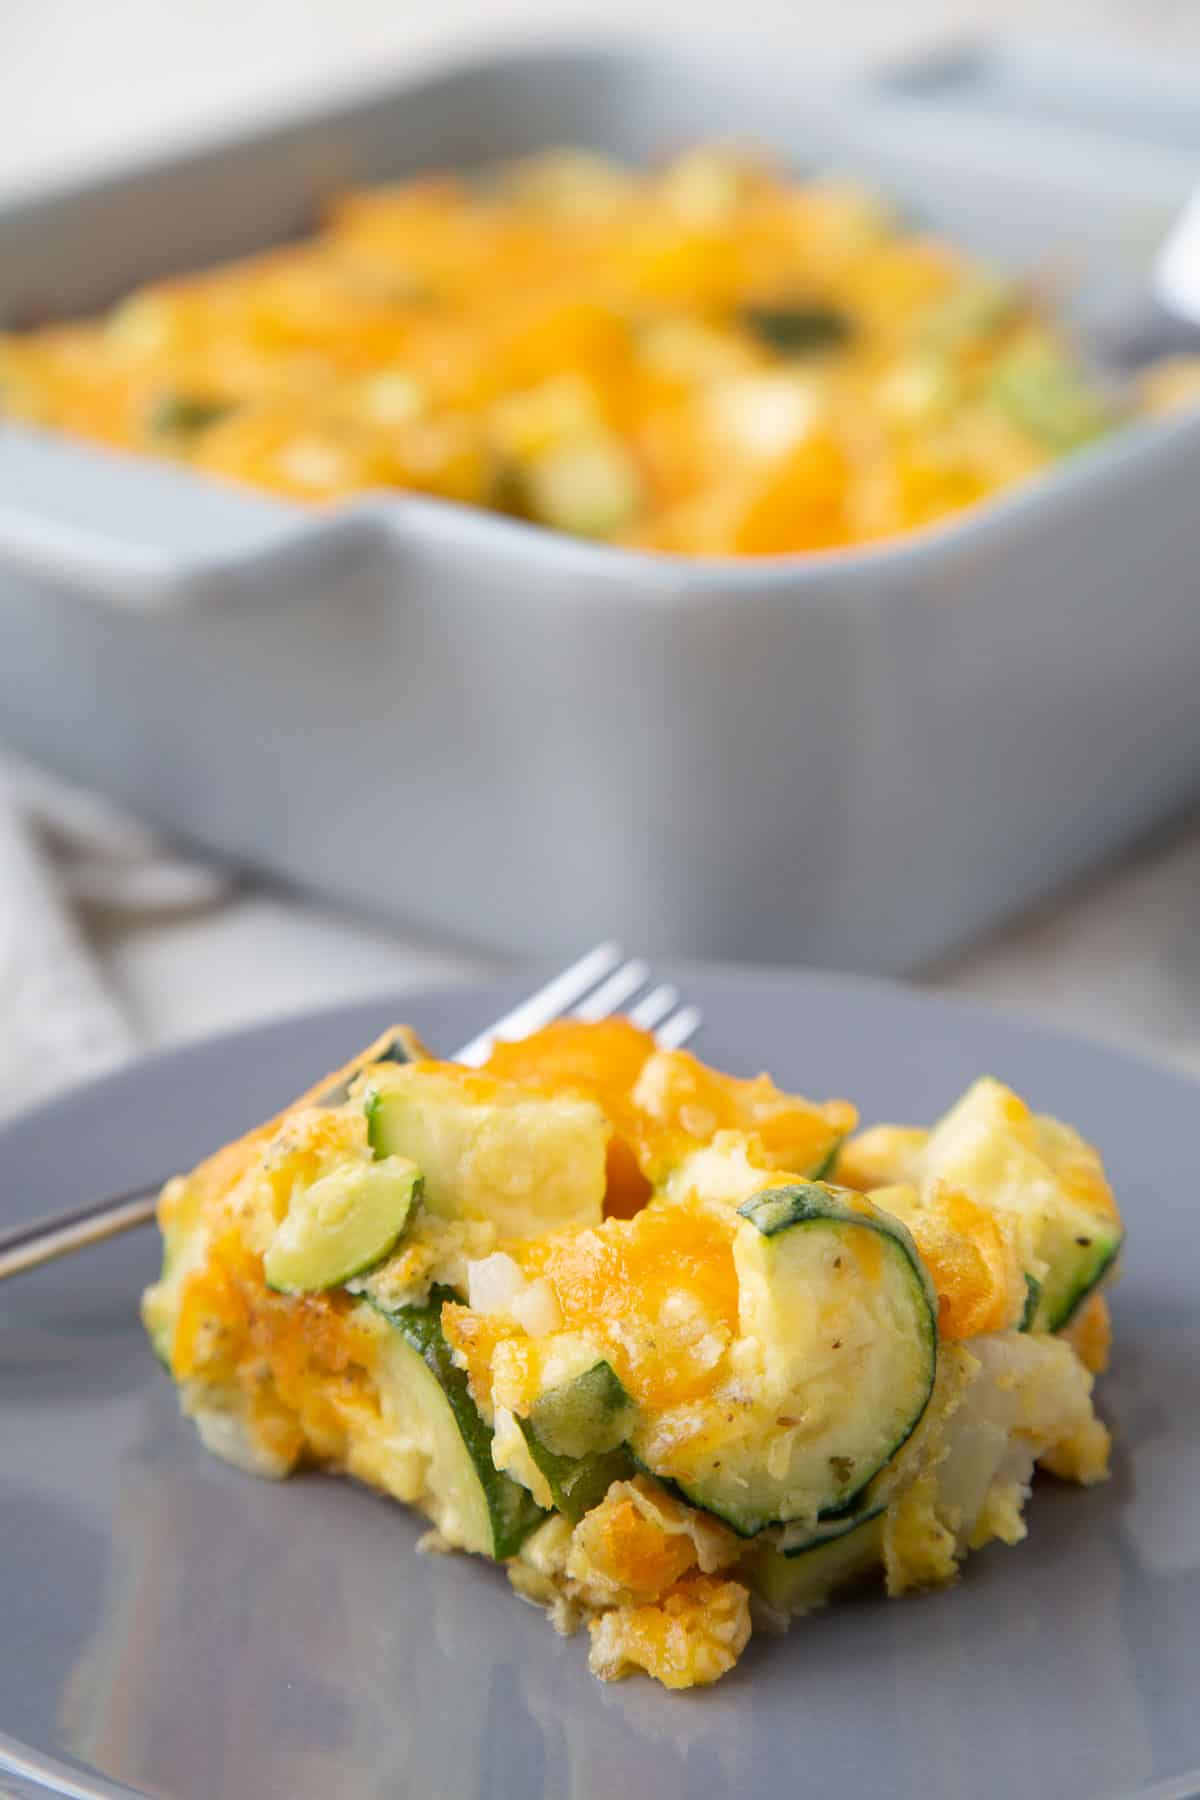 square slice of cheesy zucchini casserole on a gray plate with a gray casserole dish with more casserole in the background.